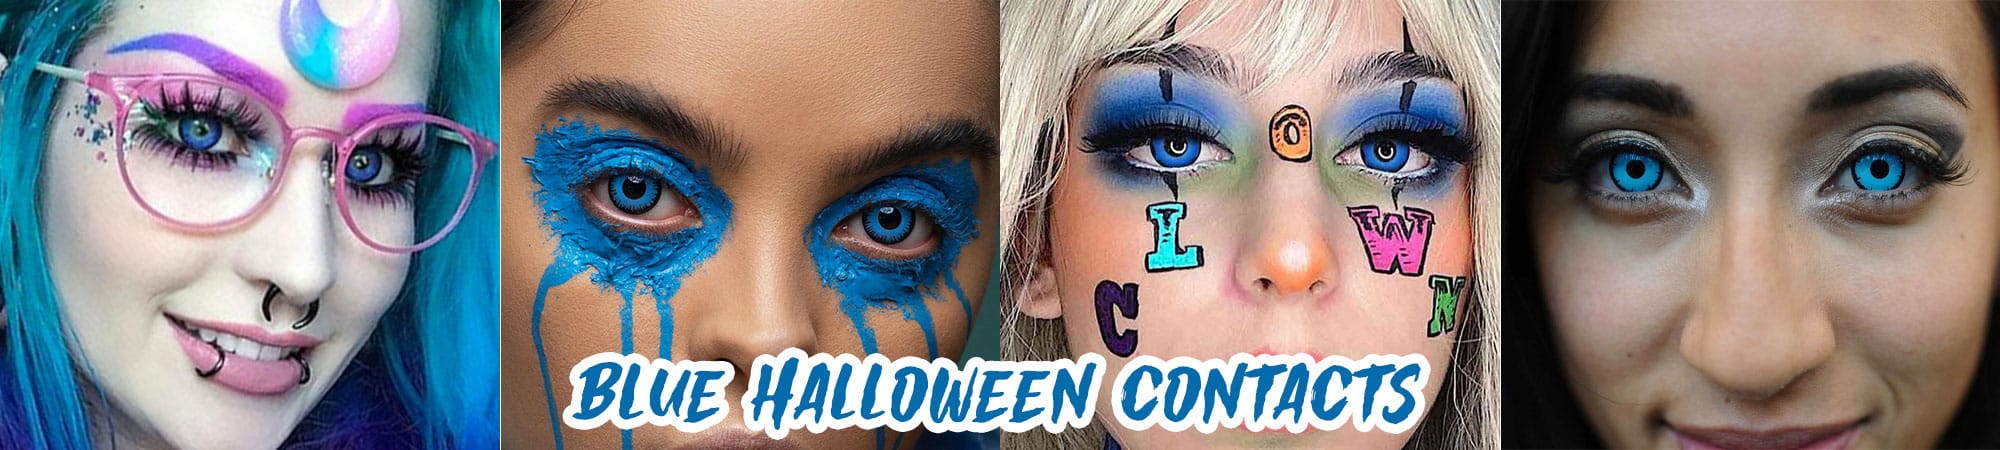 Blue Halloween Contacts